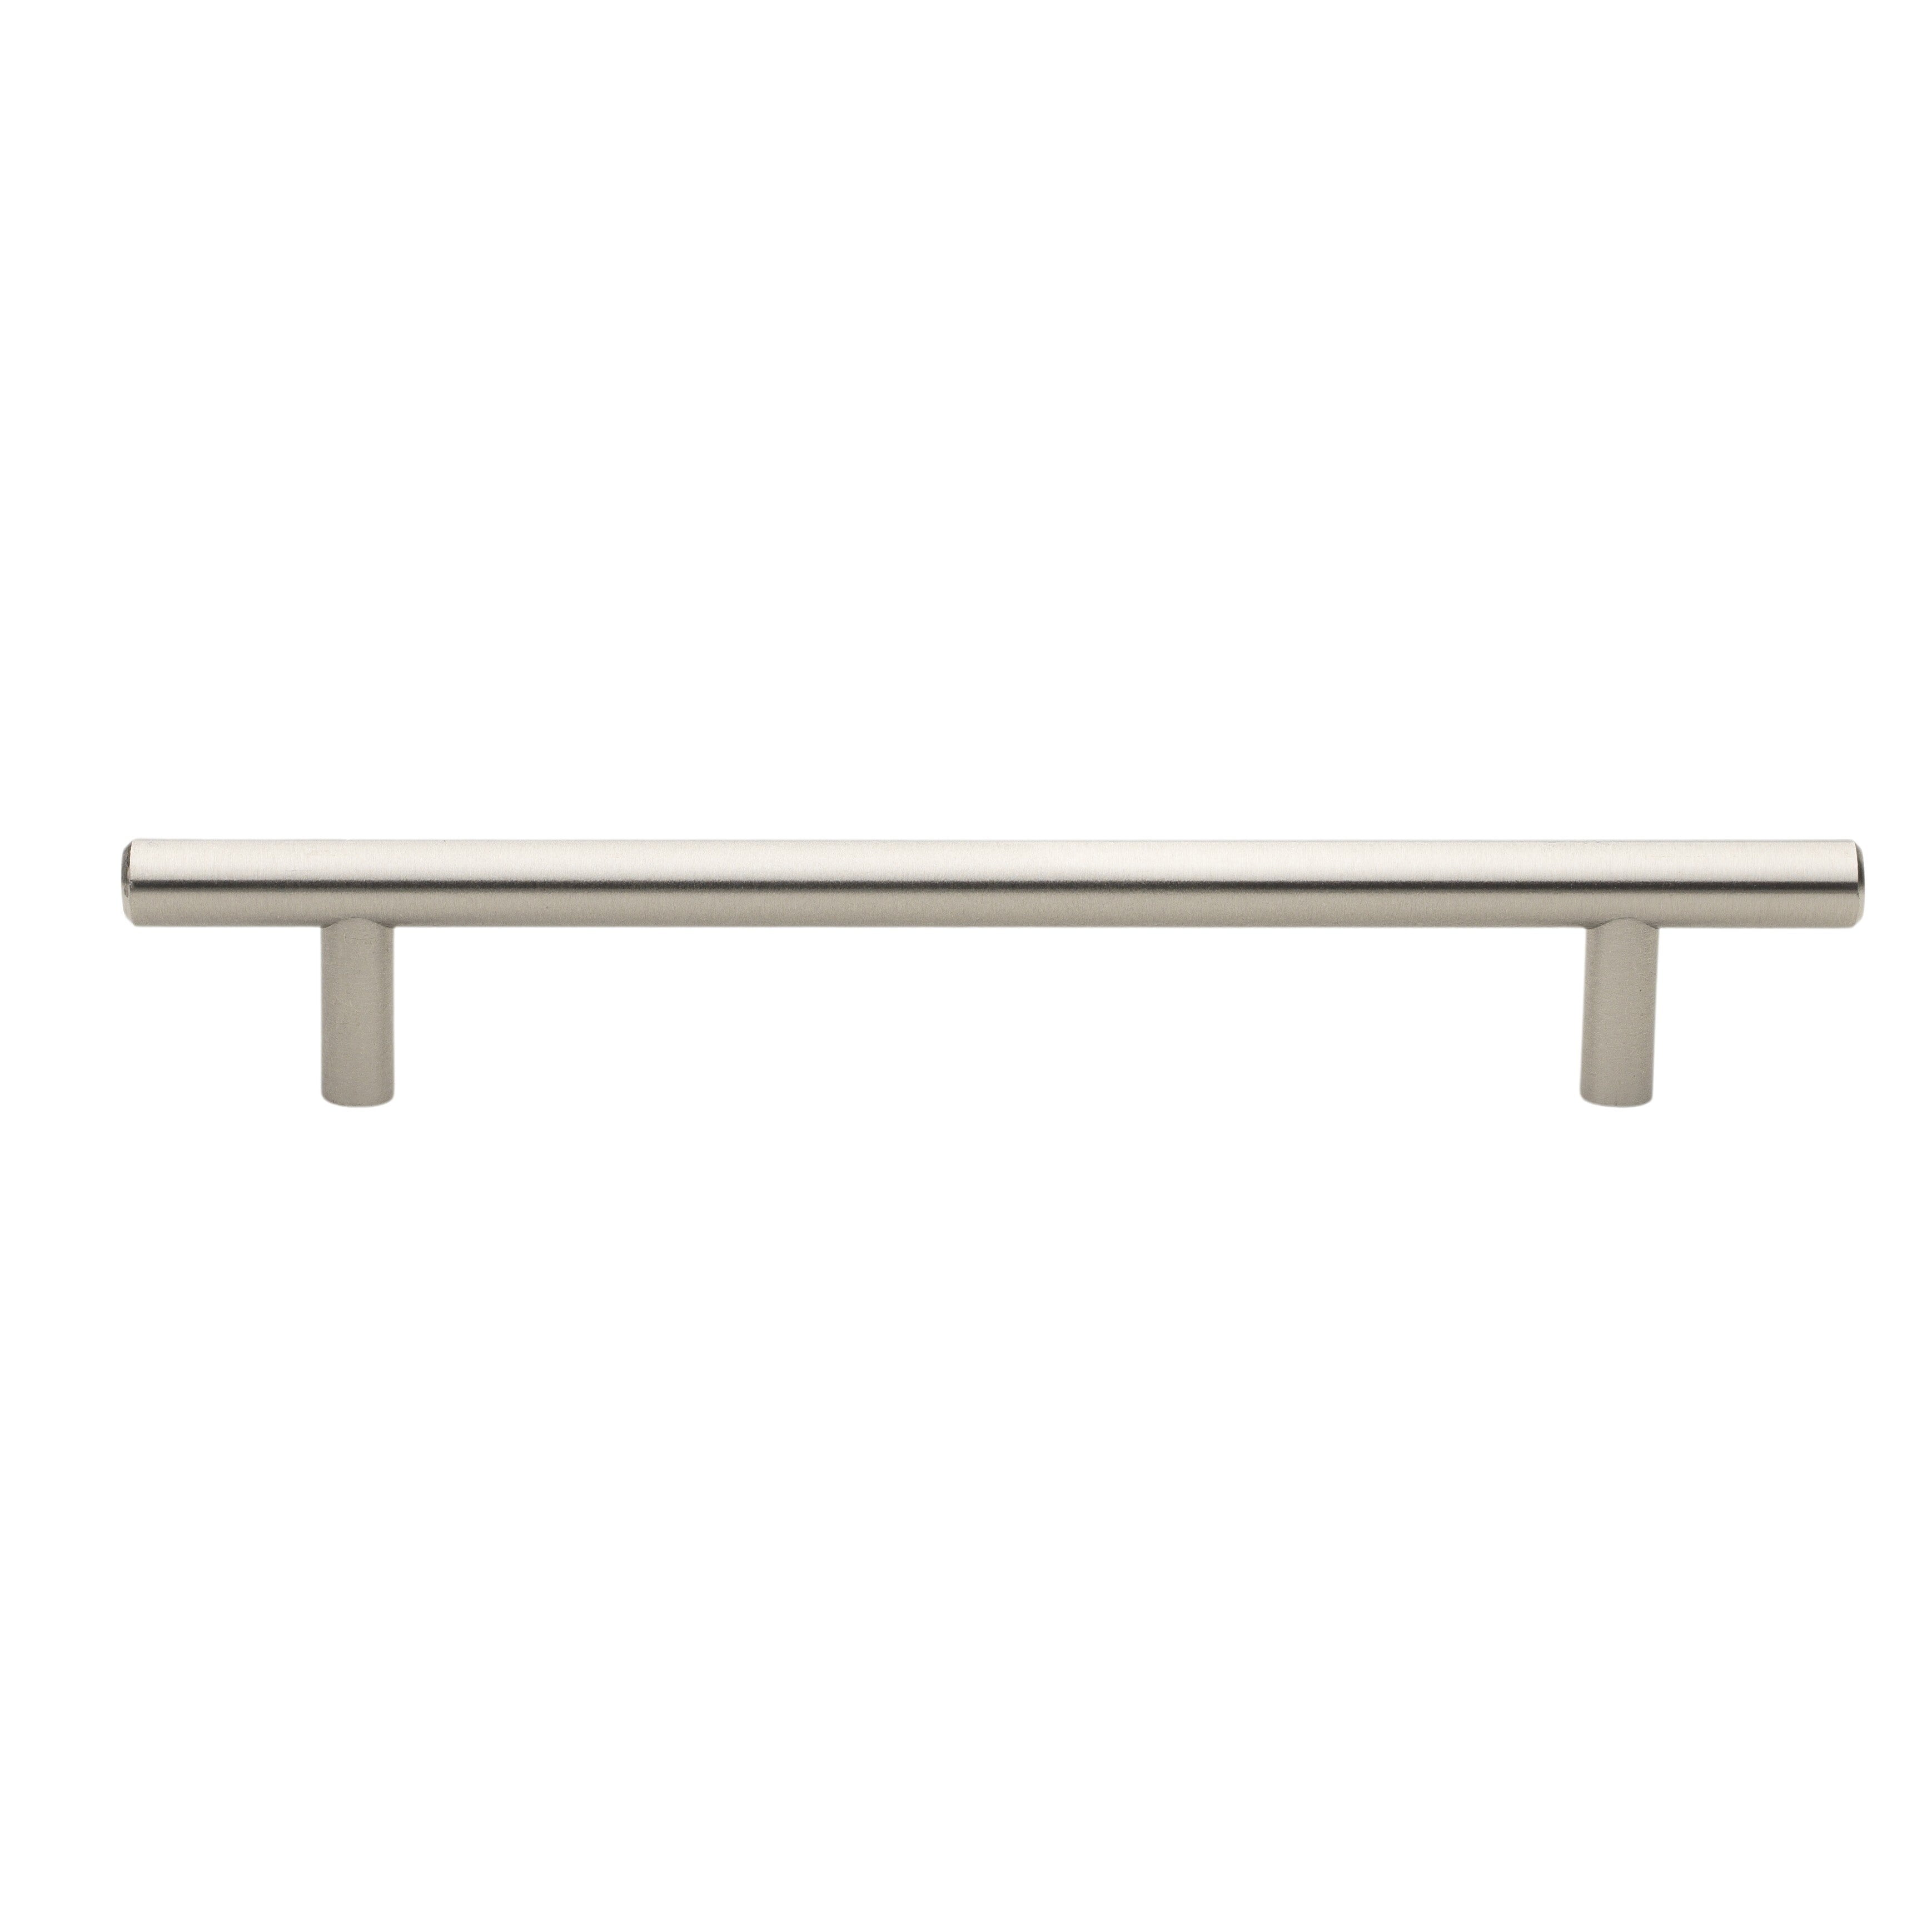 GlideRite 6-1/4 in. Center Solid Modern Cabinet Bar Pull, Stainless Steel, Pack of 5 - image 1 of 4